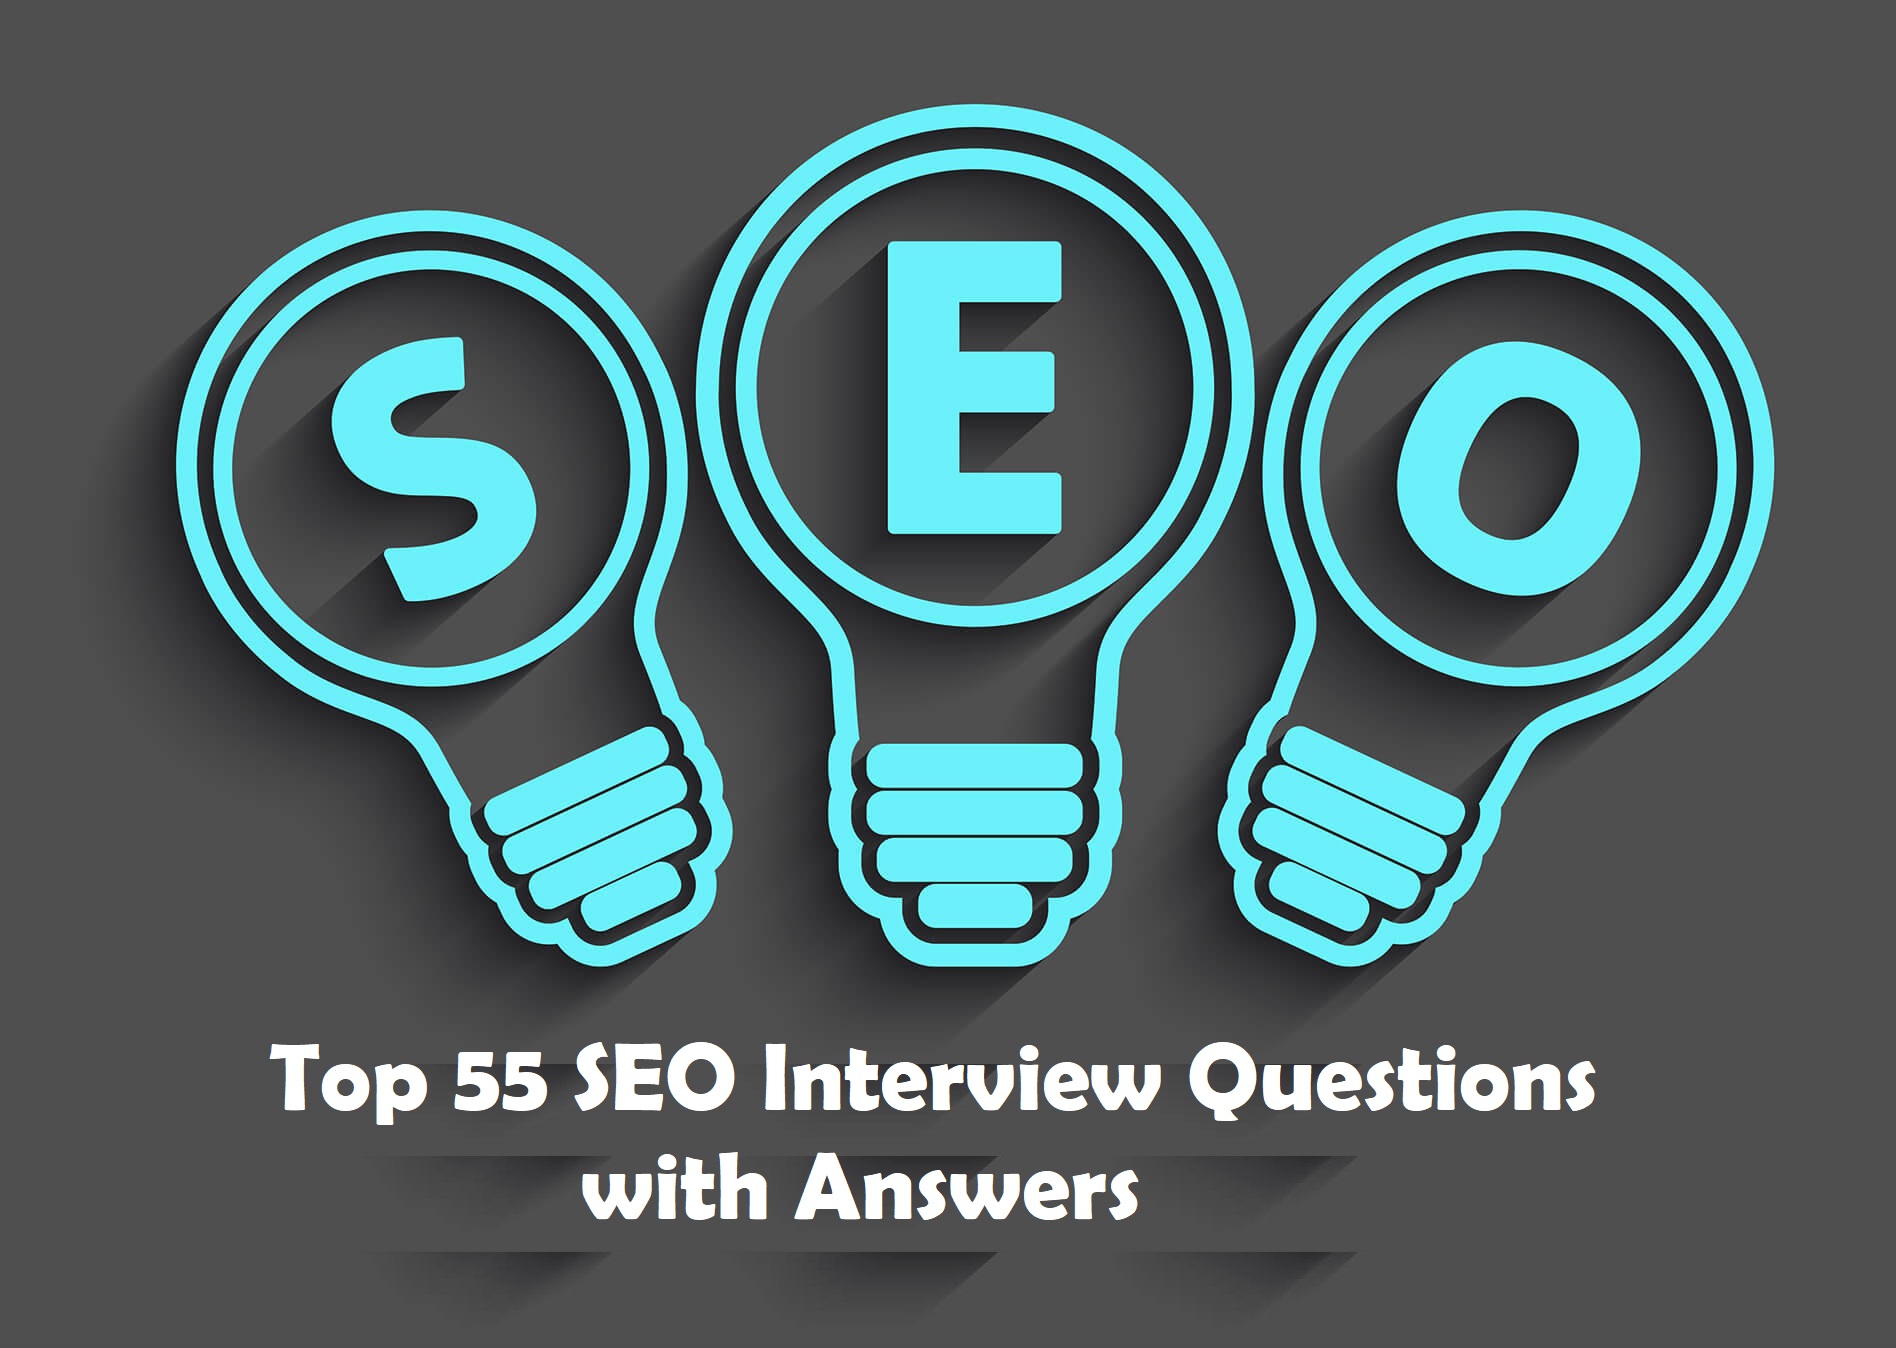 Top 55 SEO Interview Questions with Answers.